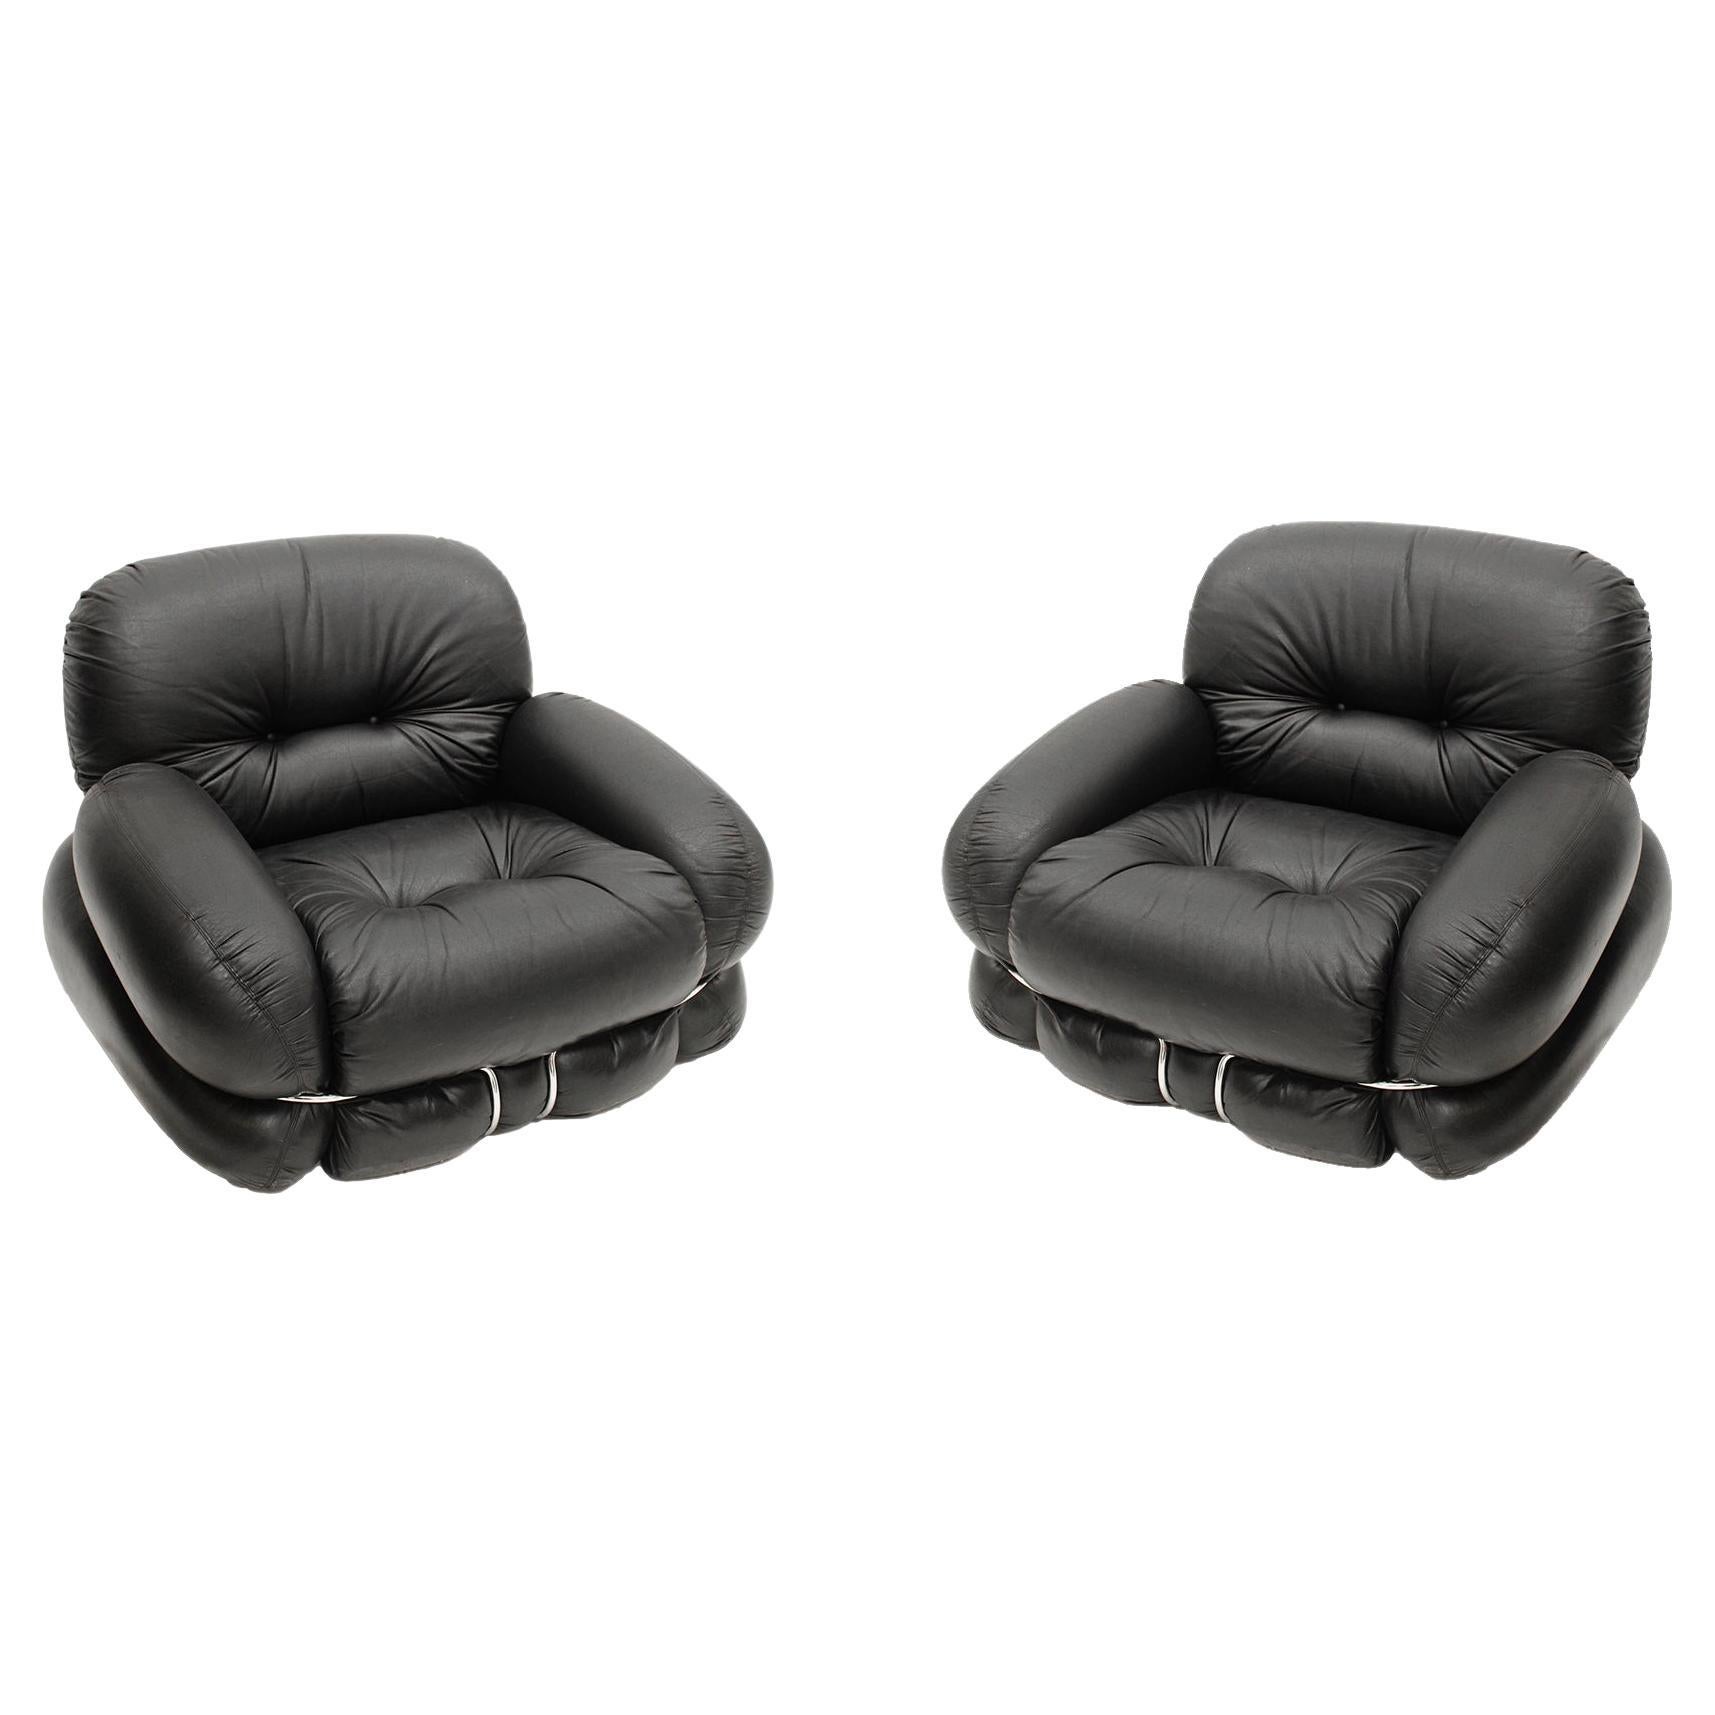 Italian Pair Of Okay Armchairs by Adriano Piazzesi with Black Leather and Steel  For Sale